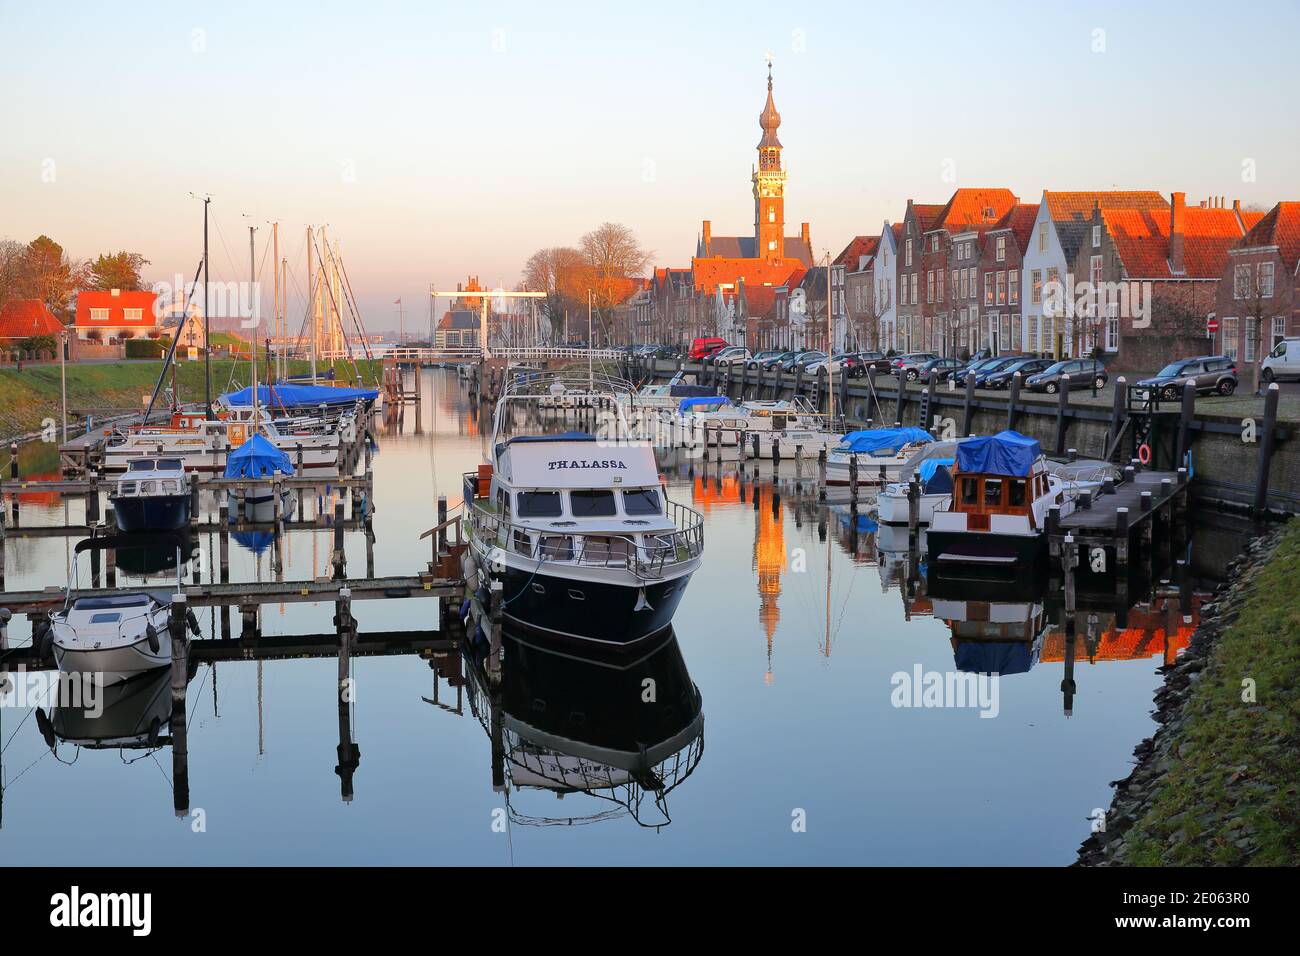 VEERE, NETHERLANDS - DECEMBER 10, 2020: The marina (harbor) and historic buildings with the clock tower of the Stadhuis (town hall) Stock Photo